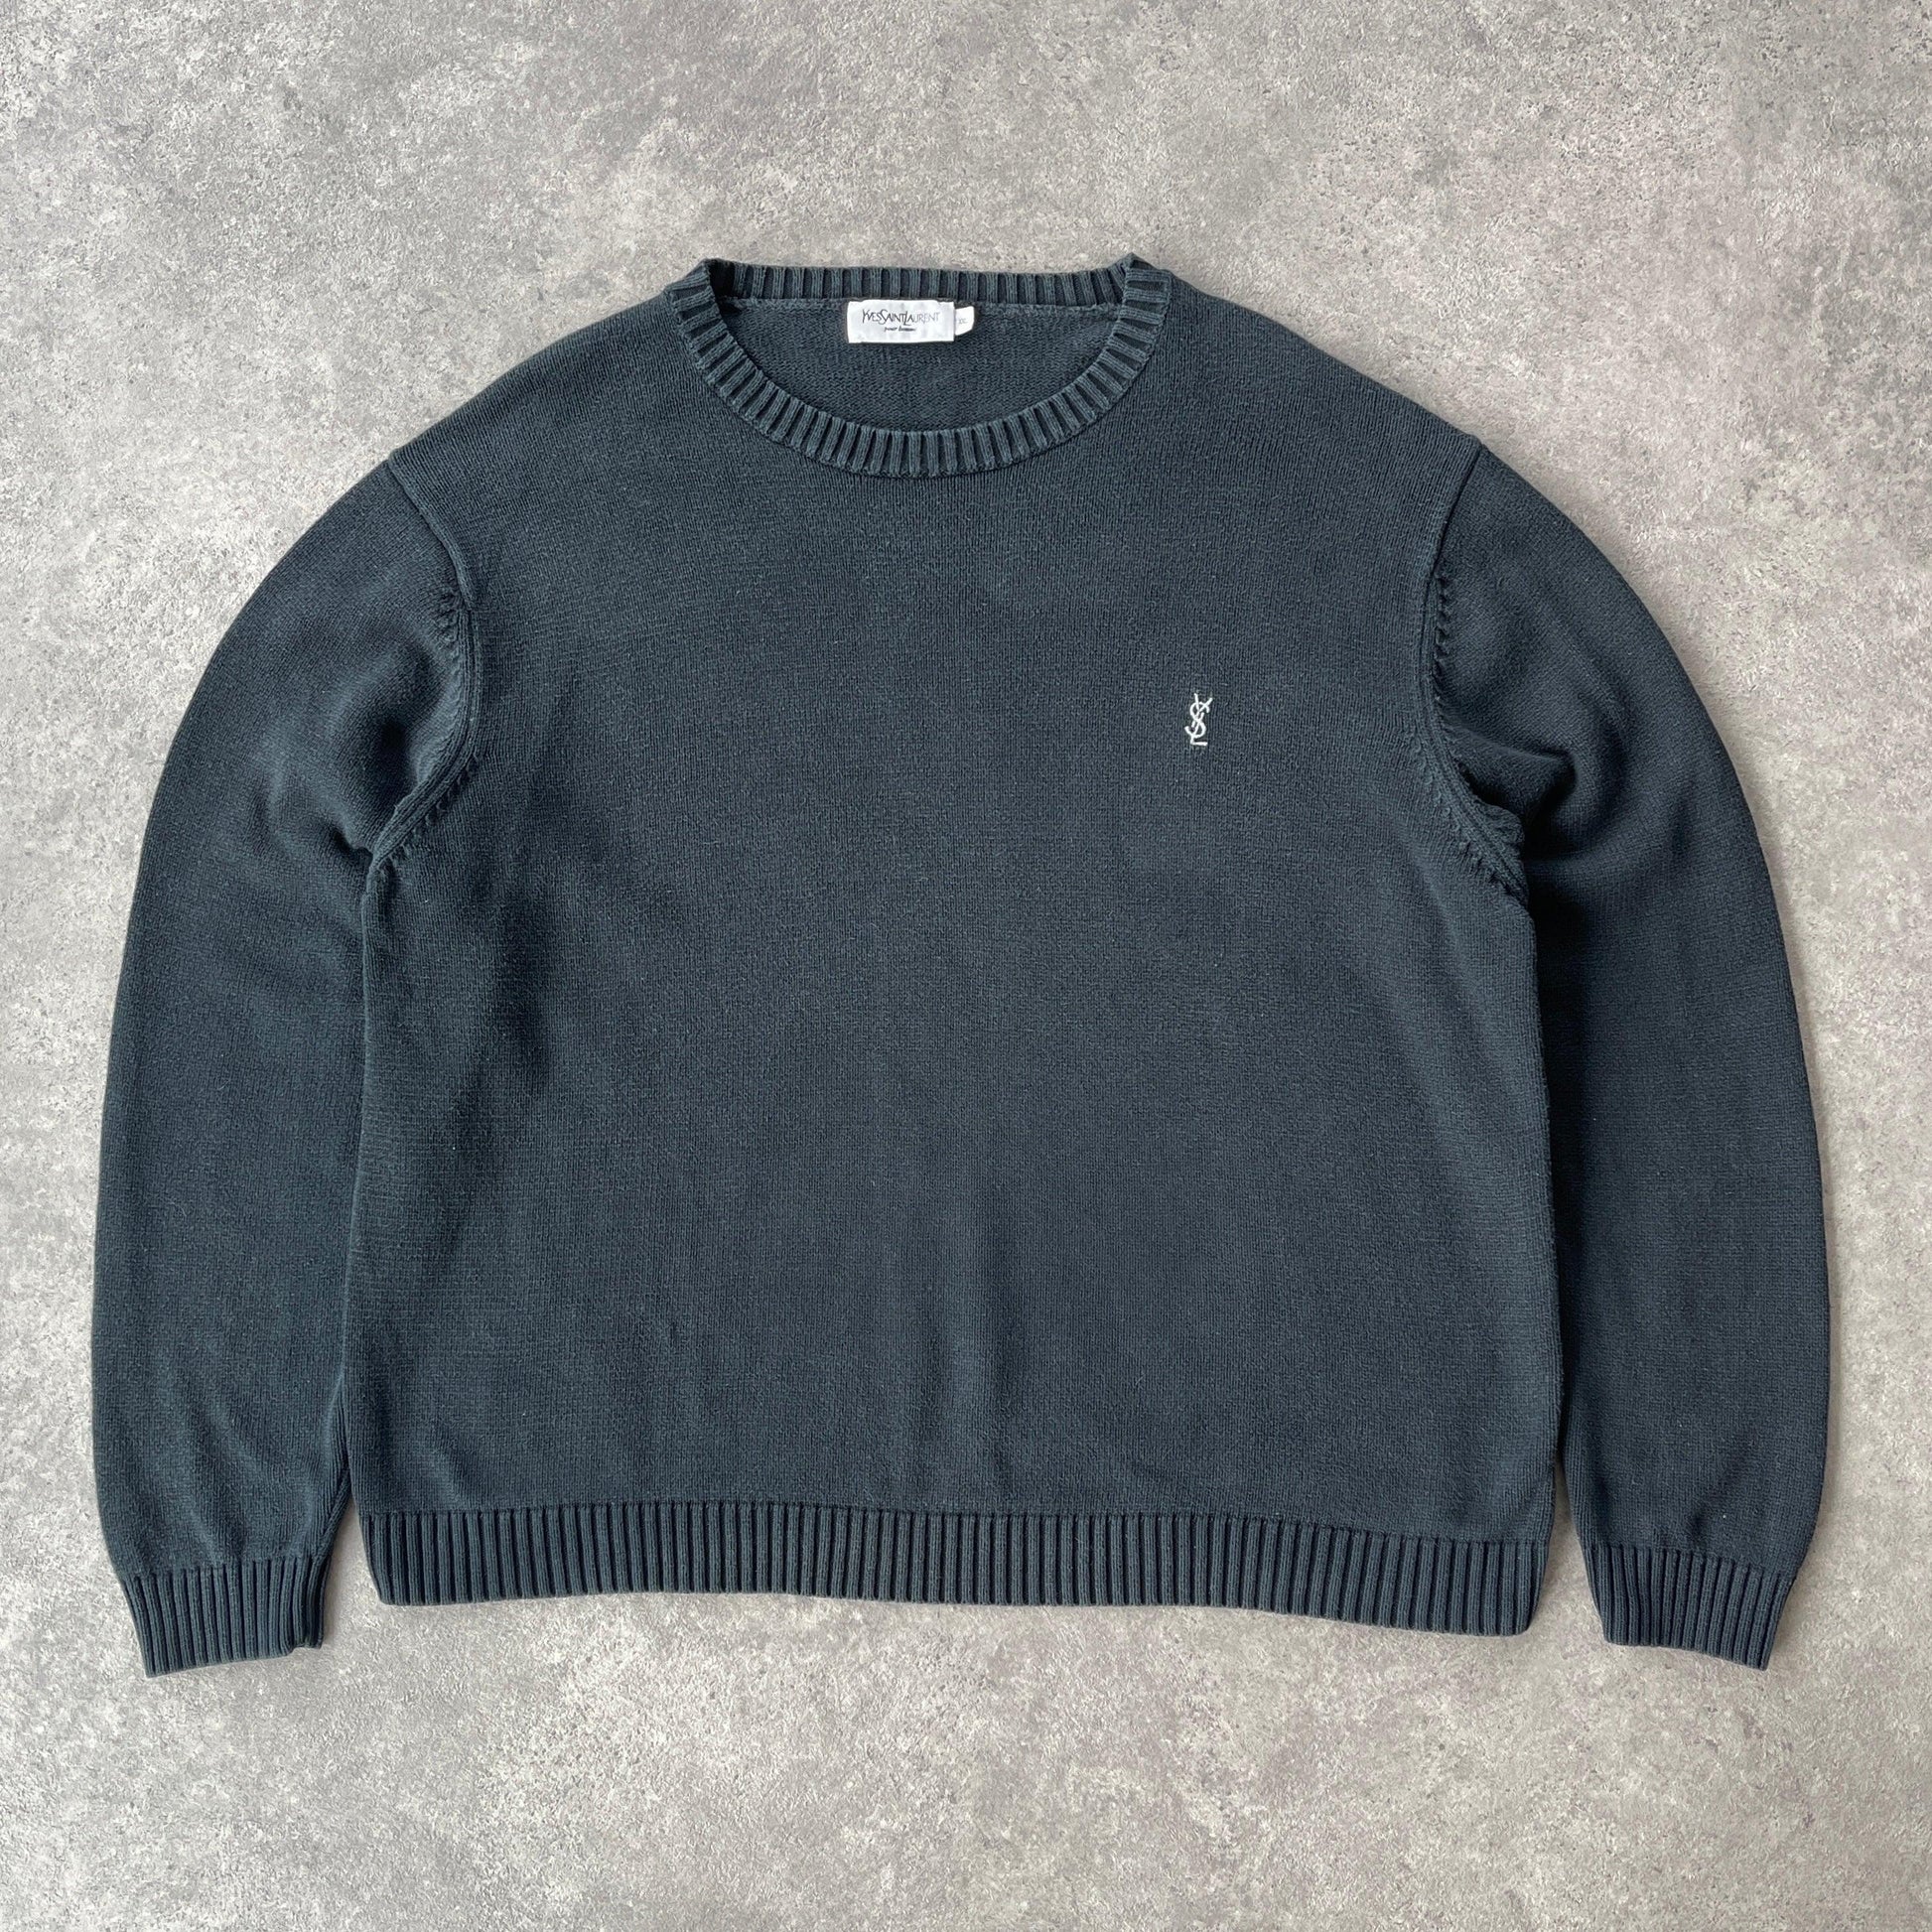 YSL 2000s heavyweight black knitted jumper (XL) - Known Source